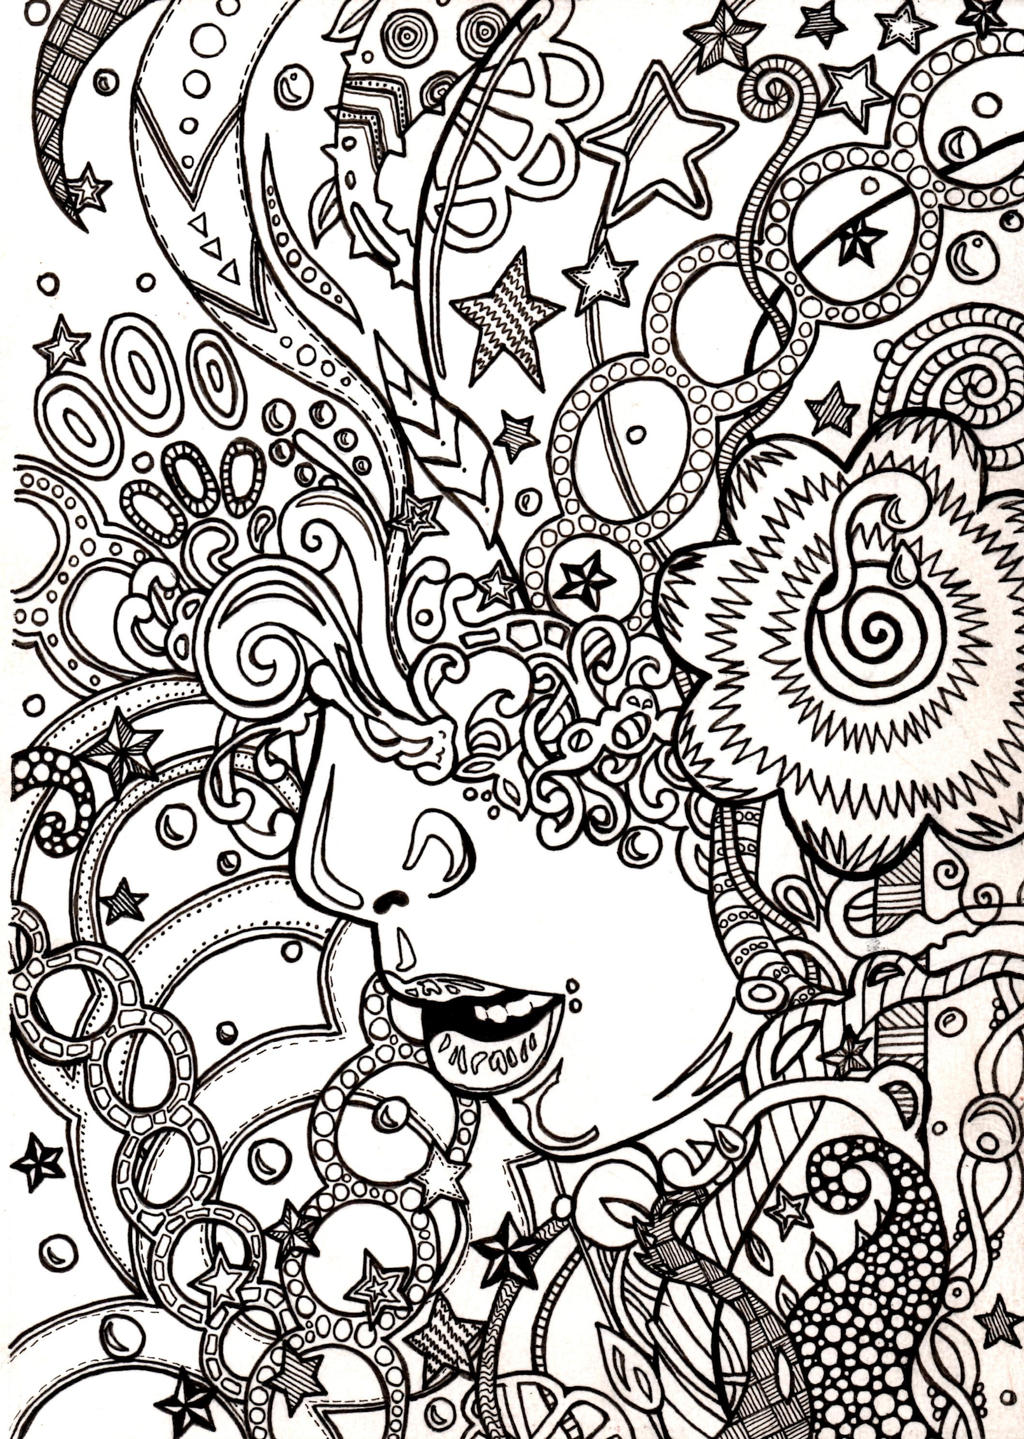 Trippy Coloring book page by ambercamiart on DeviantArt